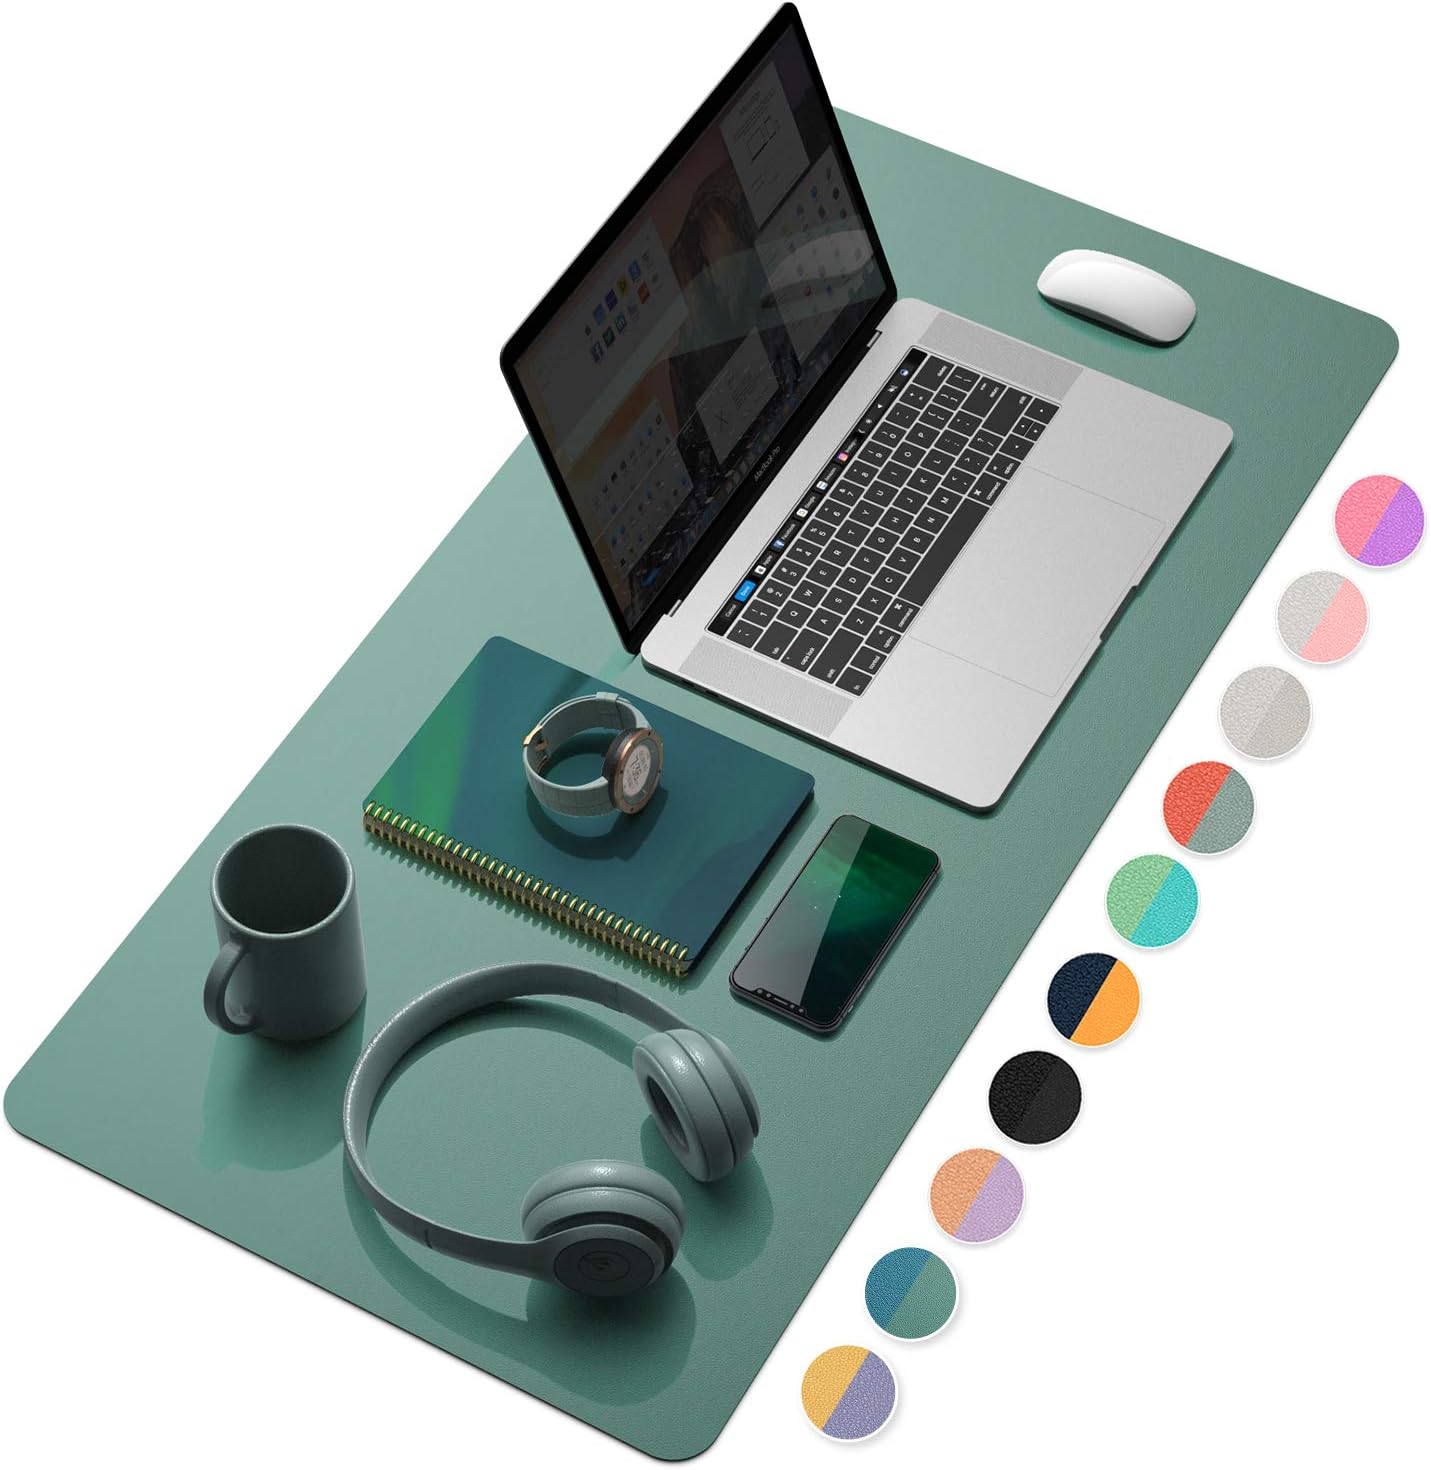 YSAGi Desk Pad, Desk Mat, Dual-Sided Desk Pad, 31.5" x 15.7" Leather Desk Pad Protector, Large Desk Blotter for Keyboard and Mouse, Waterproof Desk Writing Pad for Office(Pistachio Green + Green Blue)